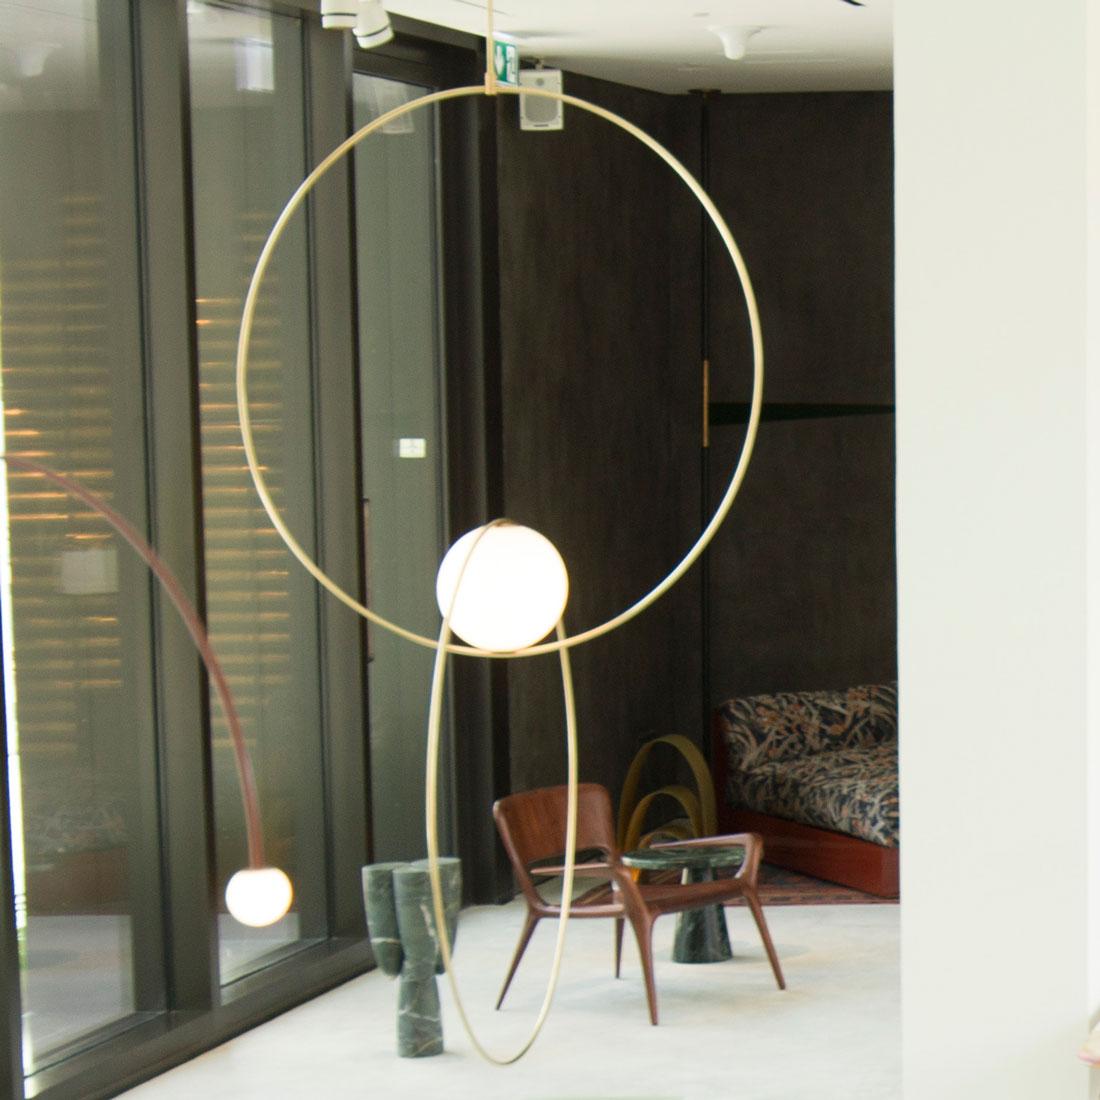 Loop collection by Michael Anastassiades balance, color, and minimal shapes. Double Loop suspension add an elemental simplicity to any space, perfect in their architectural symmetries